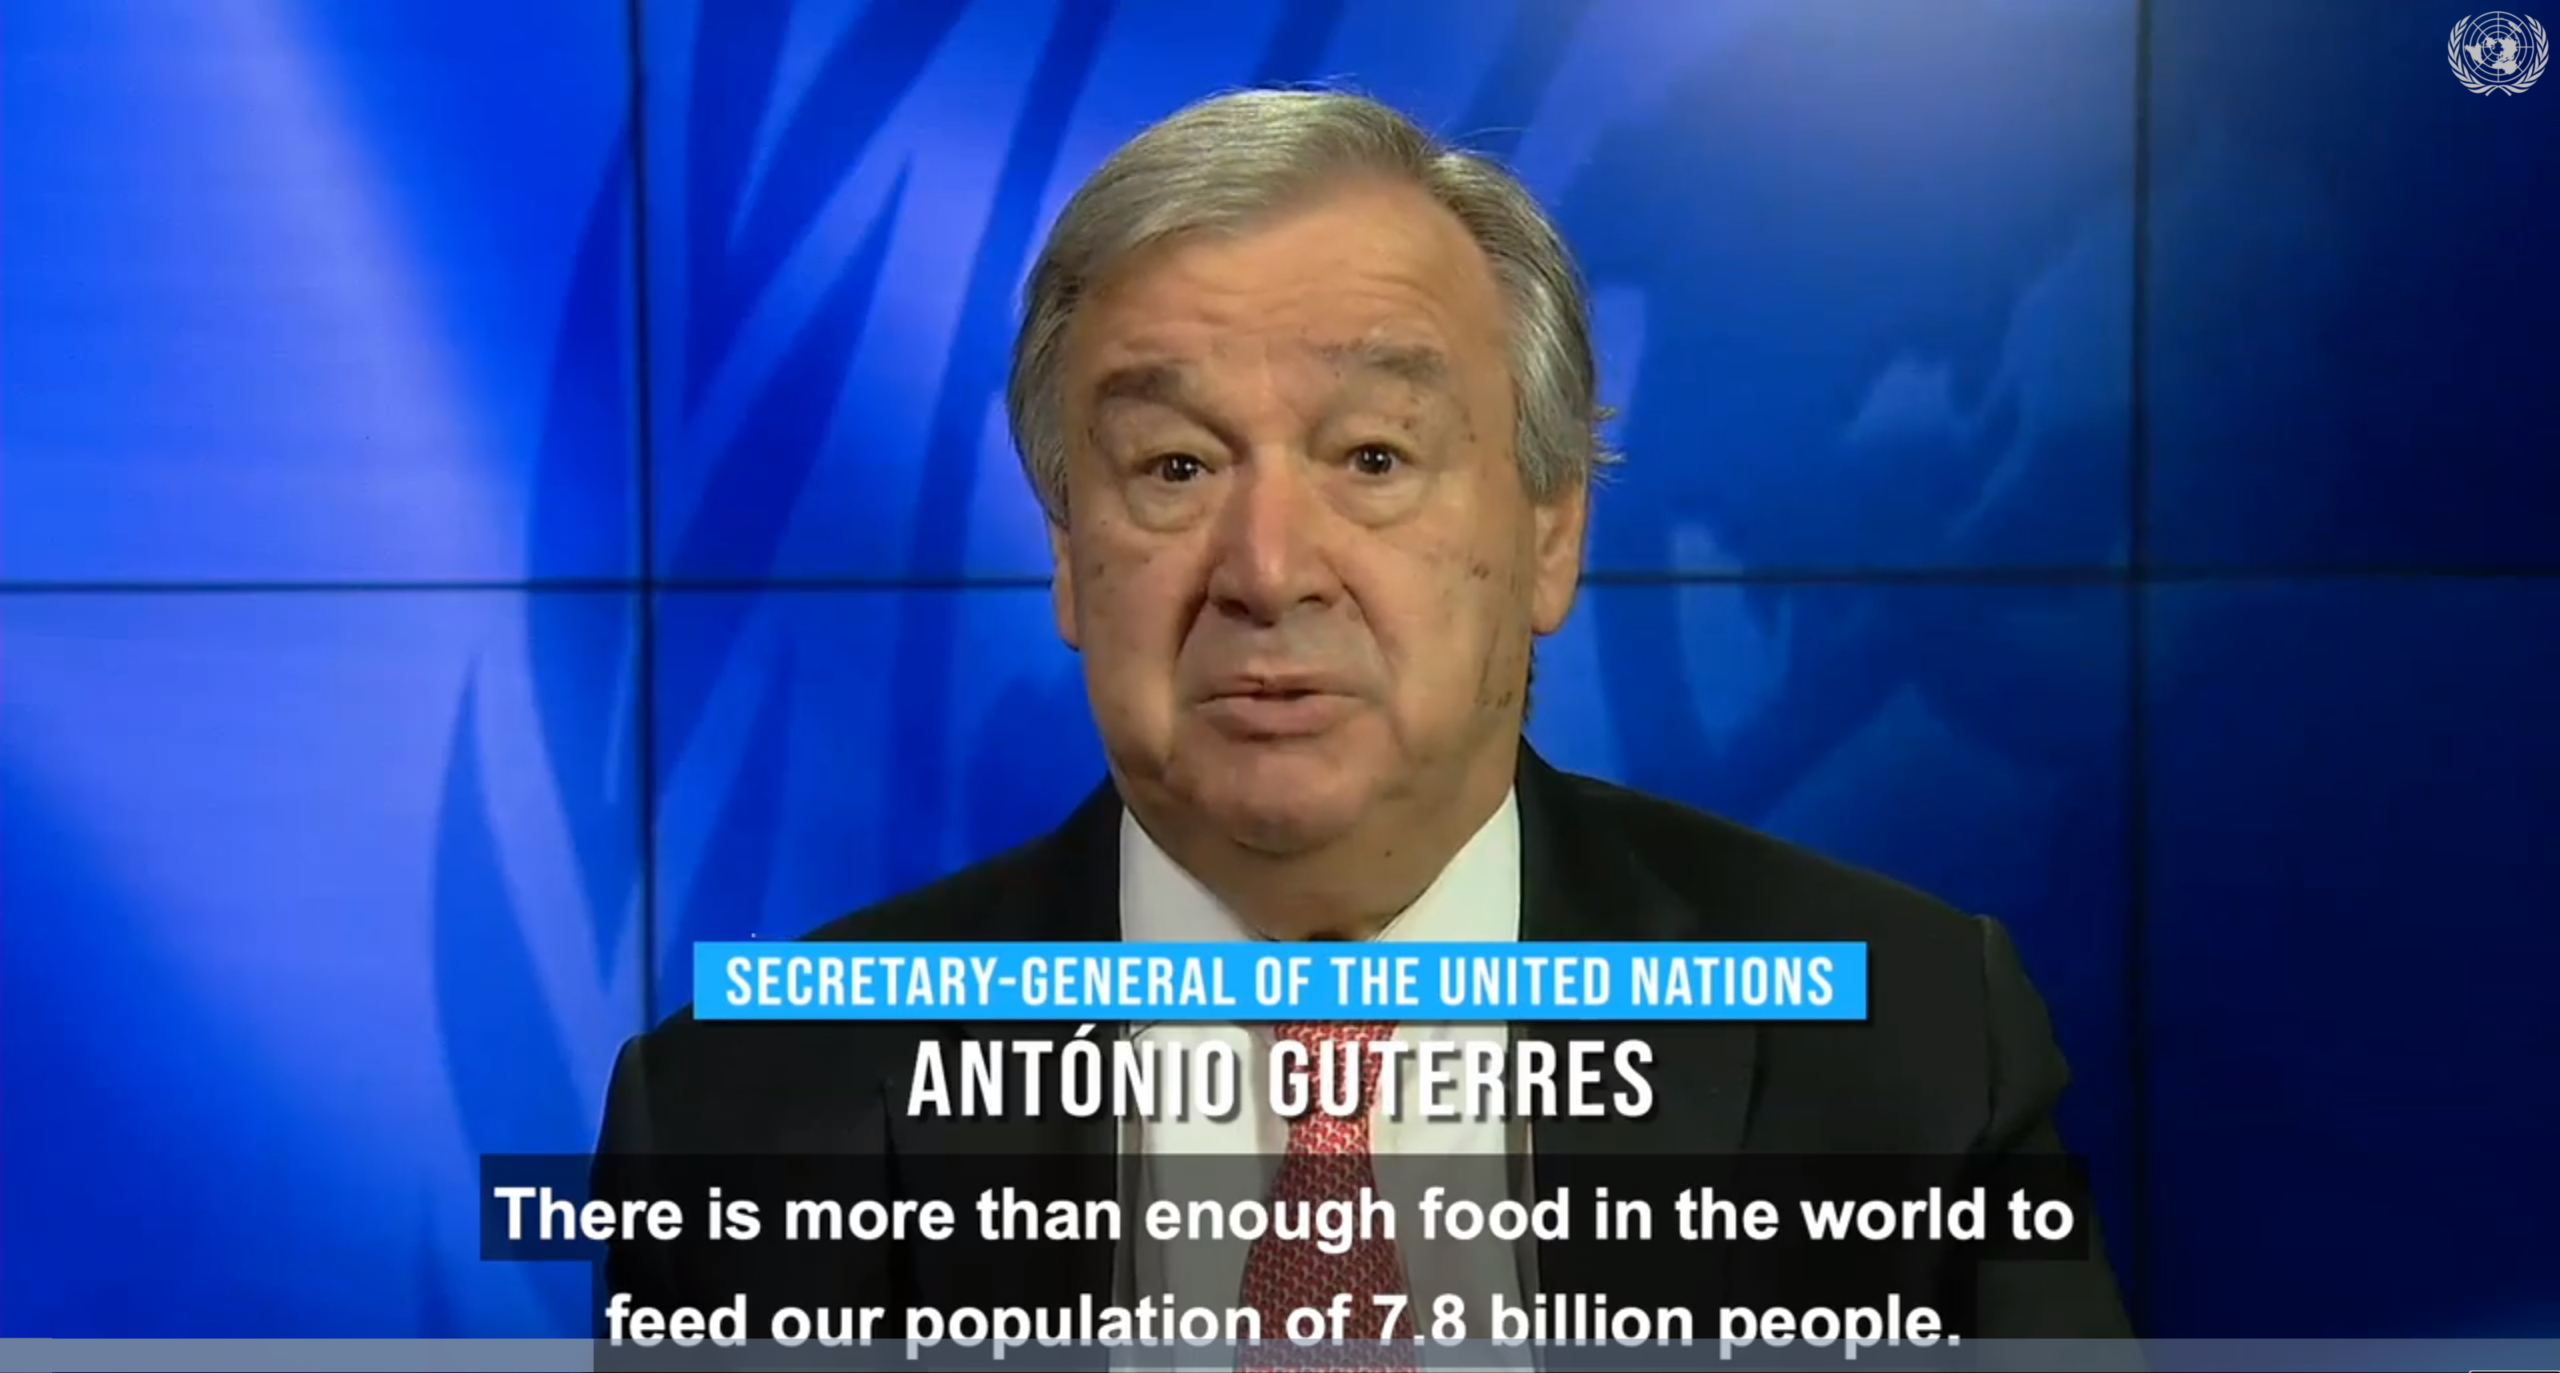 UN Secretary-General António Guterres warns of a global food crisis caused by Covid-19 during a speech on 9 June 2020. Photo: UN News